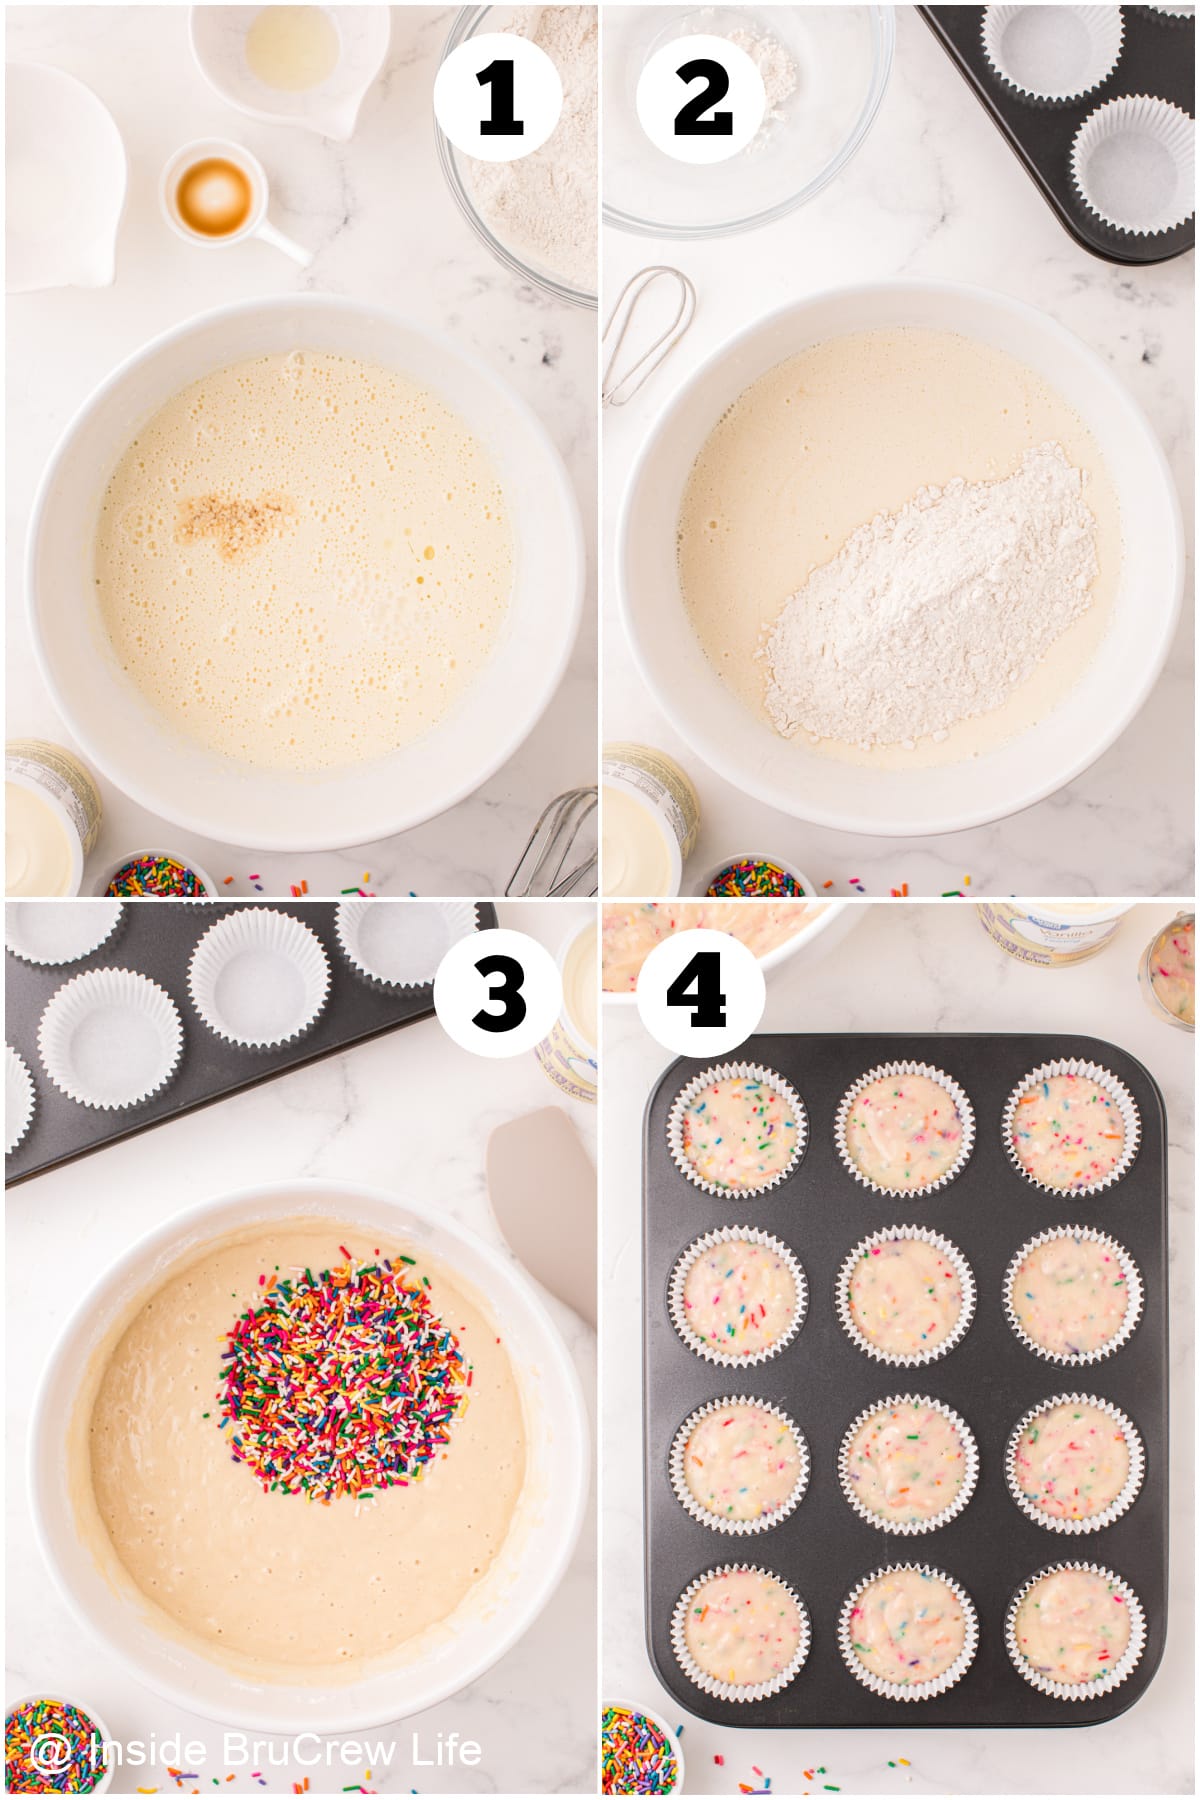 Four pictures collaged together showing how to make homemade funfetti cupcakes.